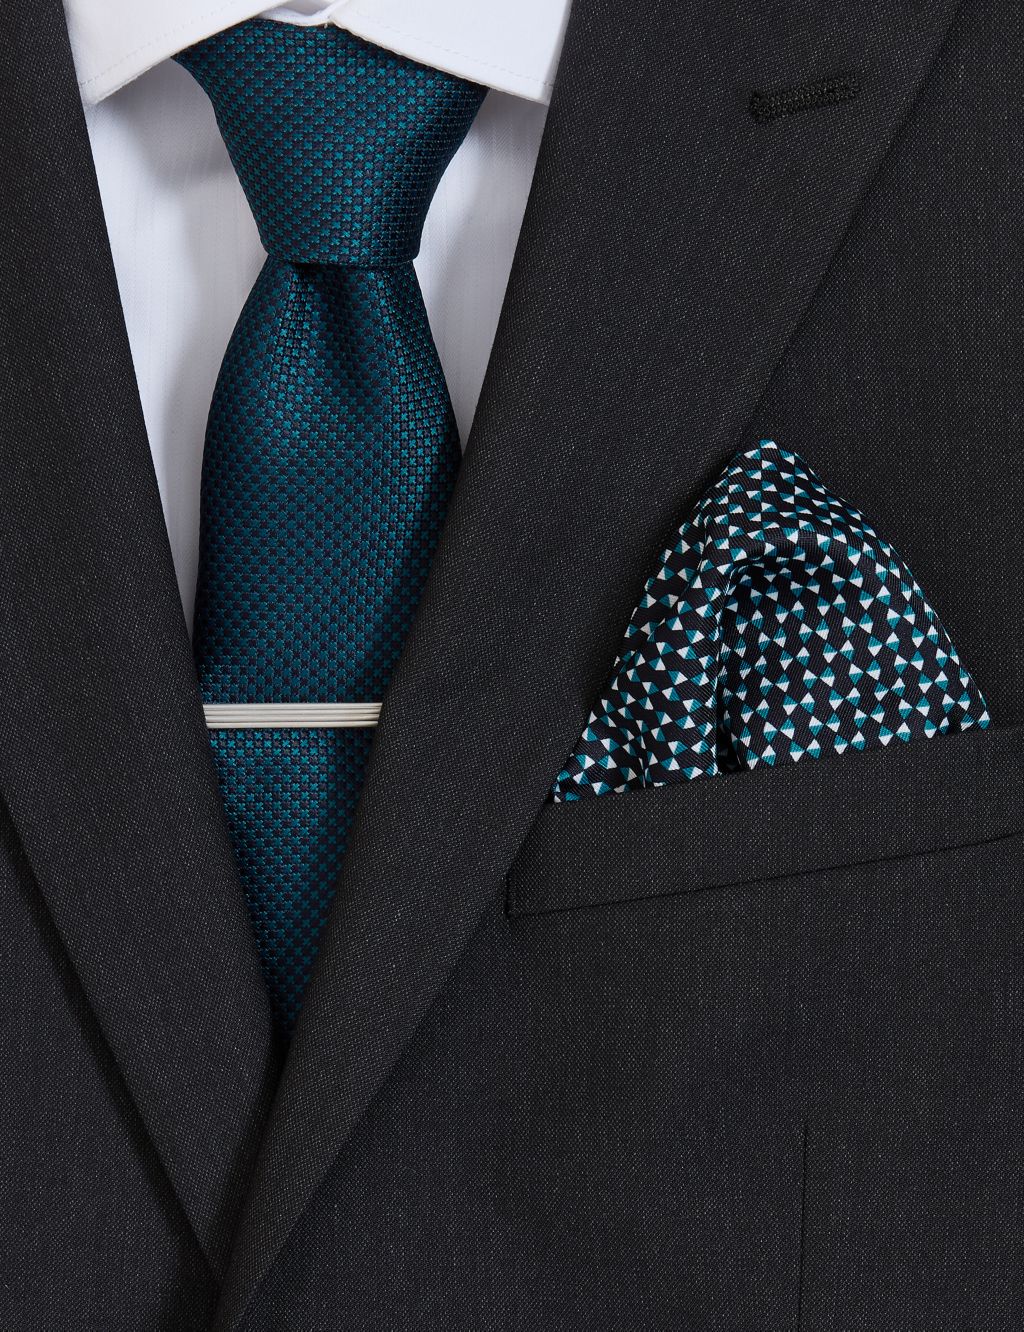 Geometric Tie, Pin and Pocket Square Set 1 of 3